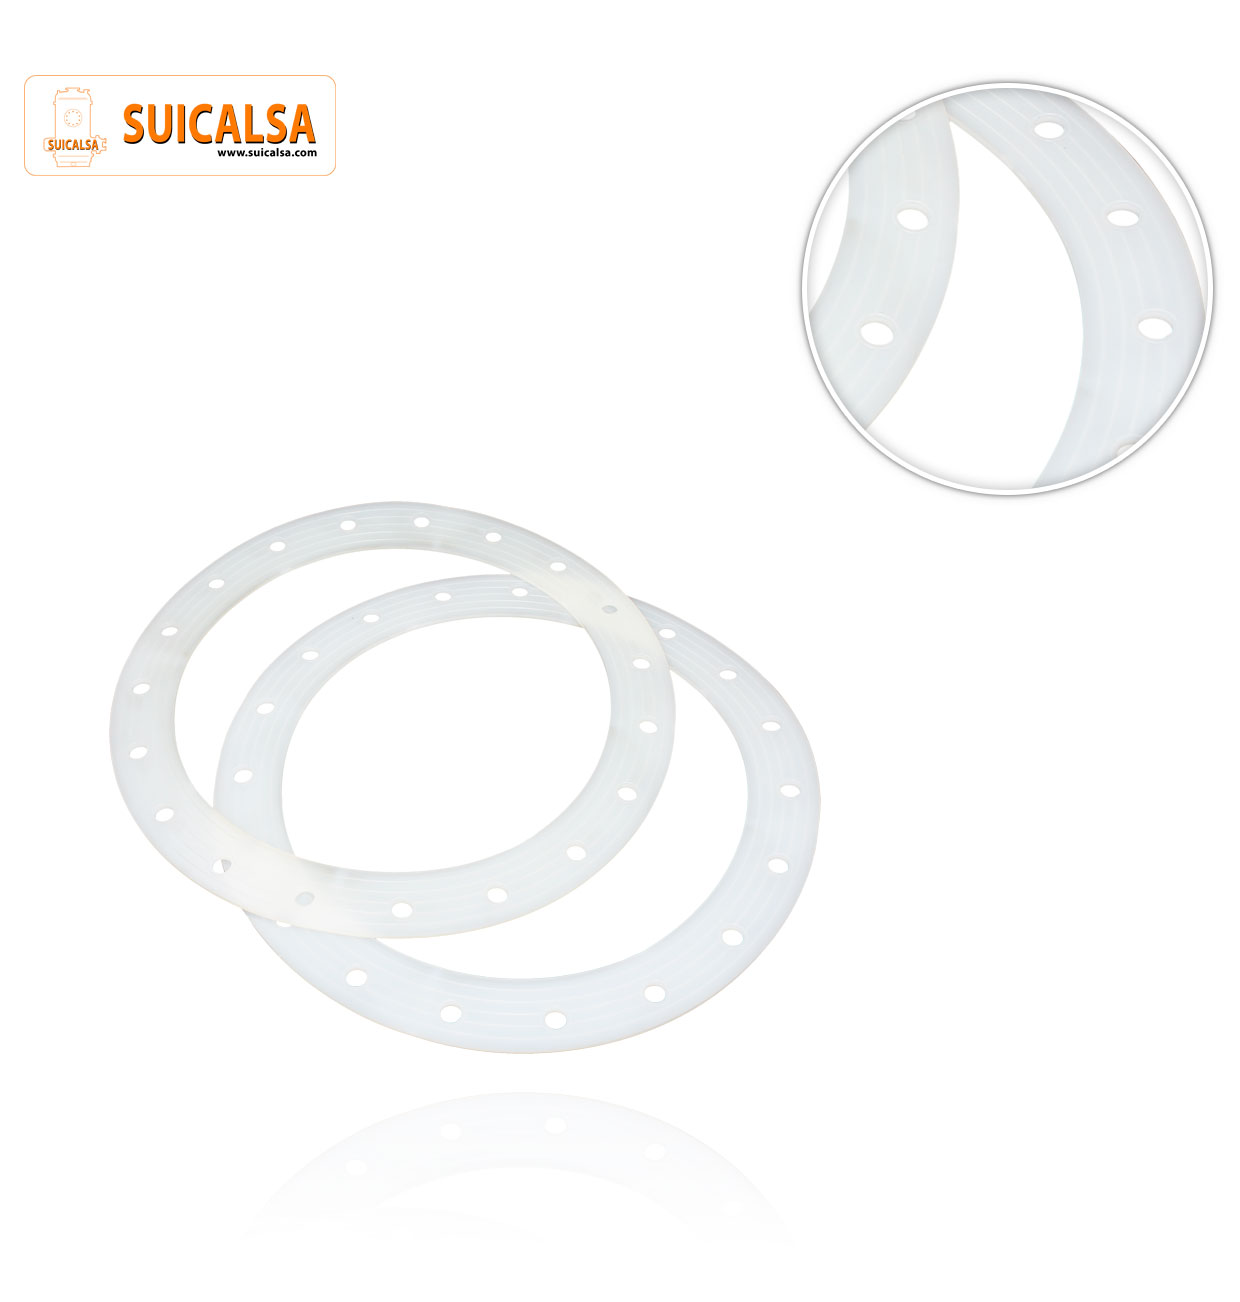 COIL HOLE GASKET FOR 750/1500L STORAGE TANK